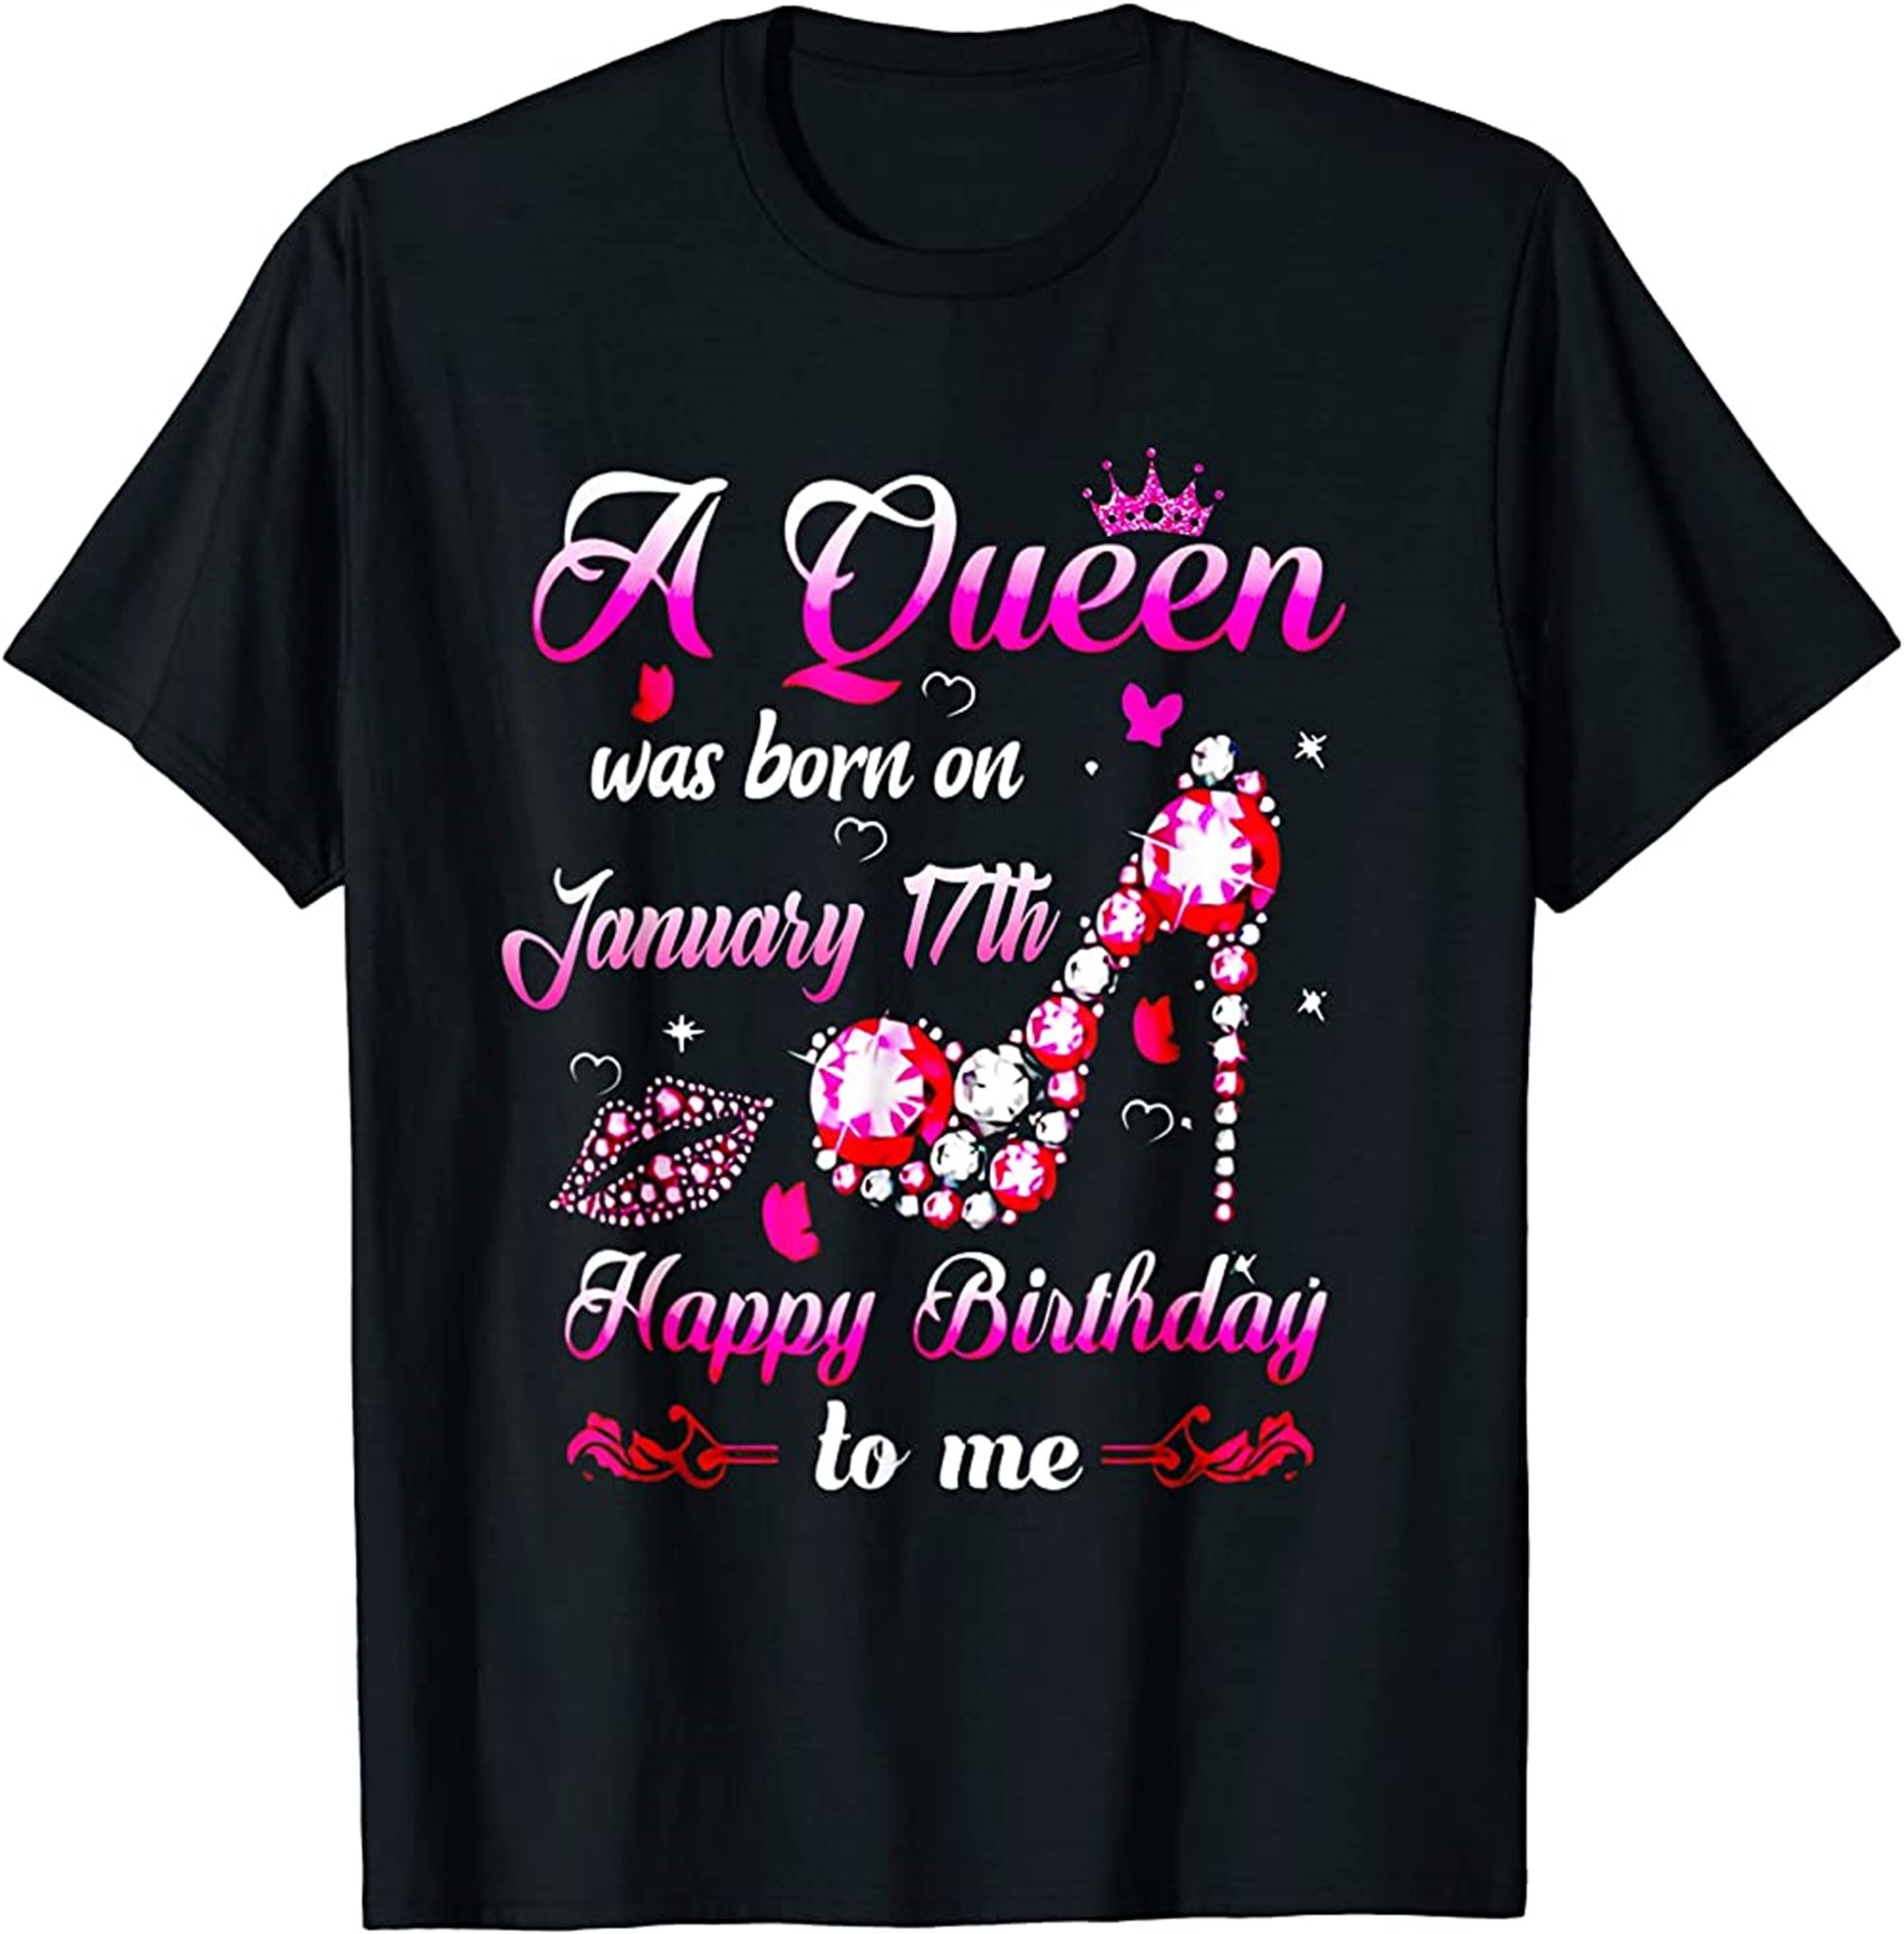 A Queen Was Born On January 17th Happy Birthday To Me T-shirt Size Up To 5xl